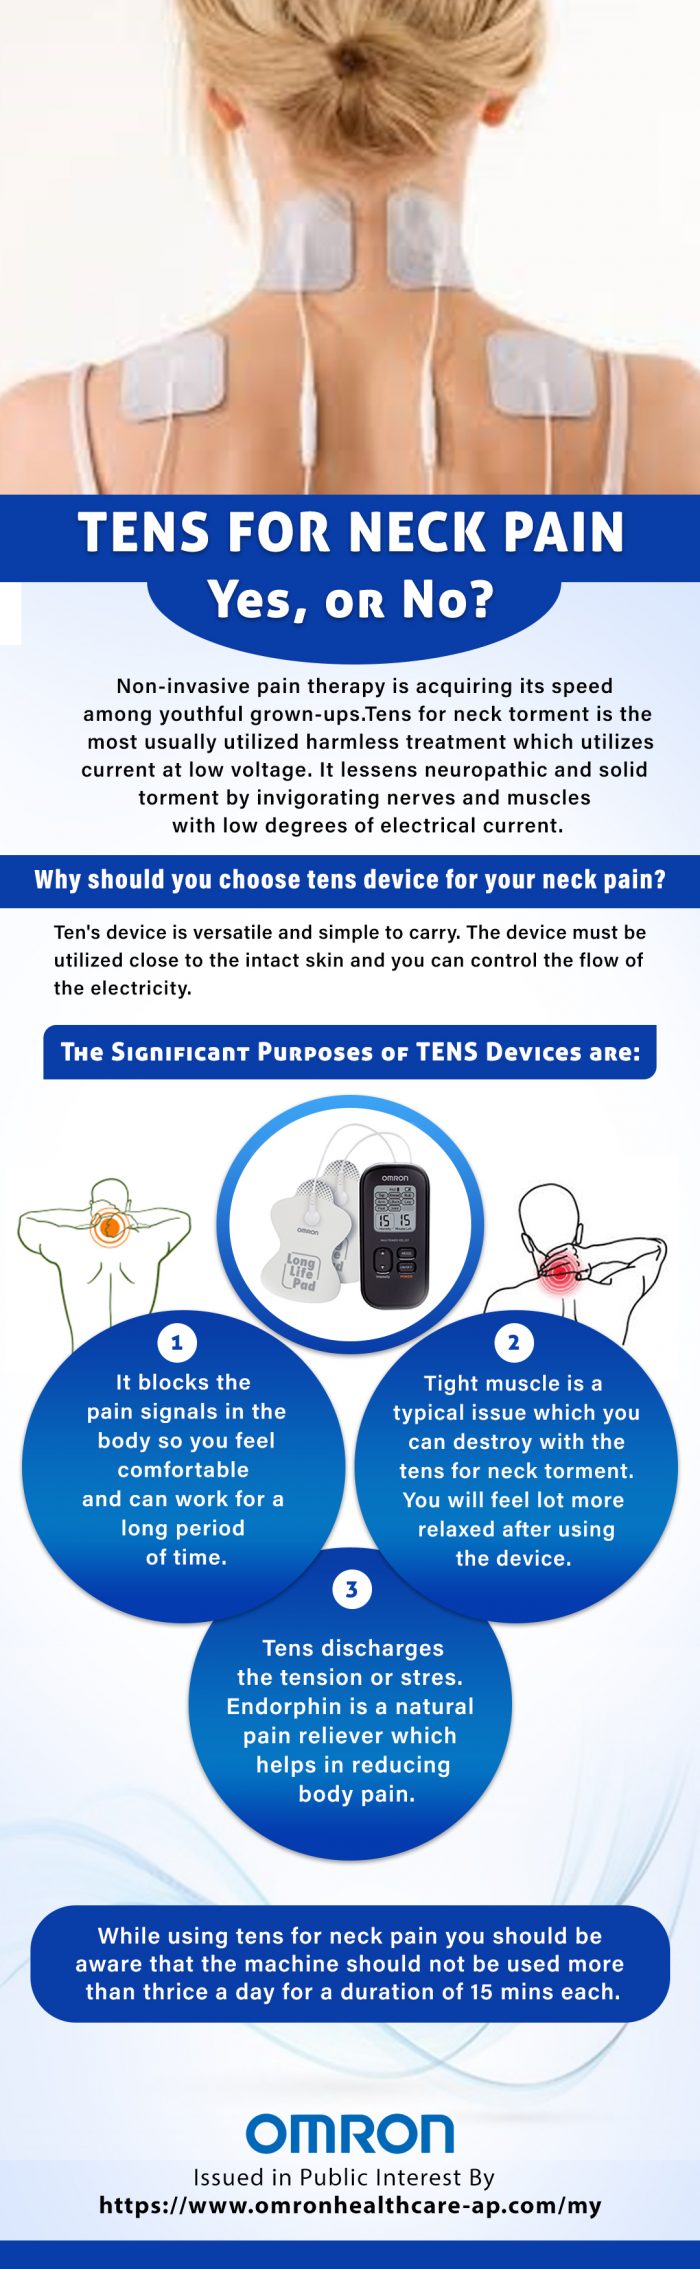 How to Use a TENS Unit for Neck Pain